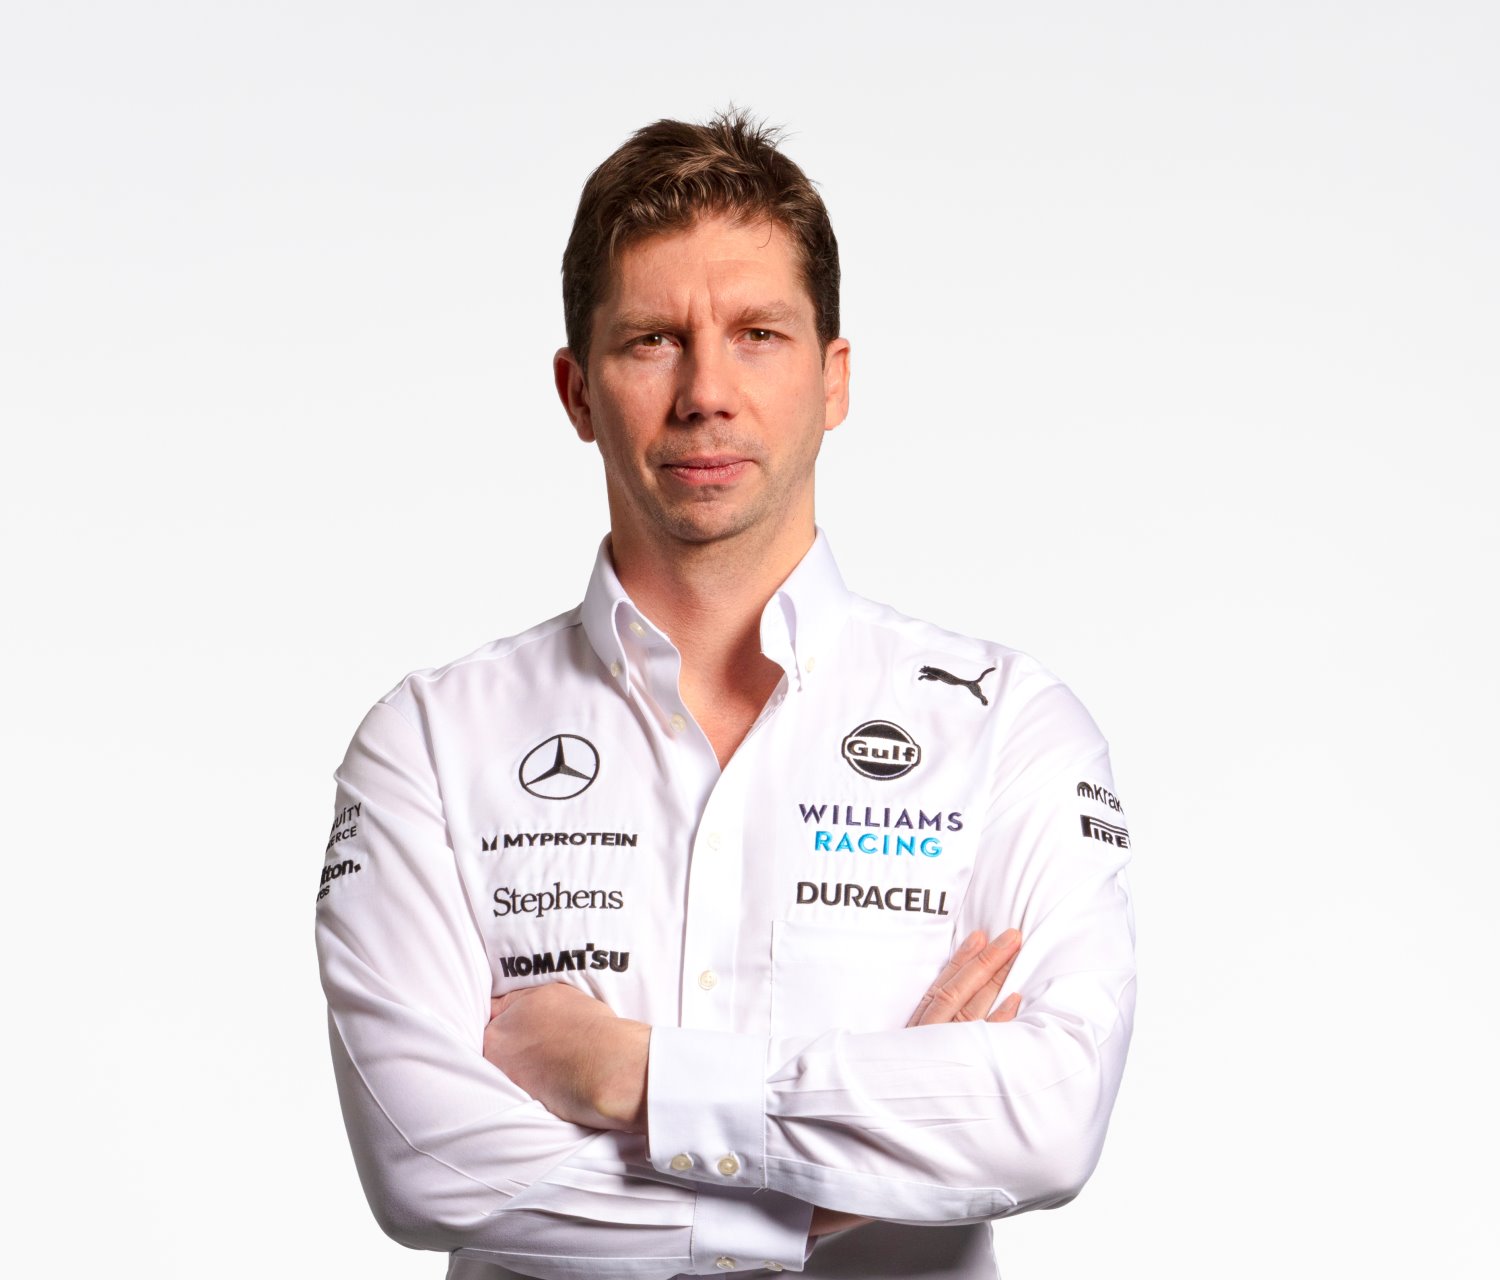 Williams F1 Team Boss James Vowles. Photo Supplied by Williams F1 Team